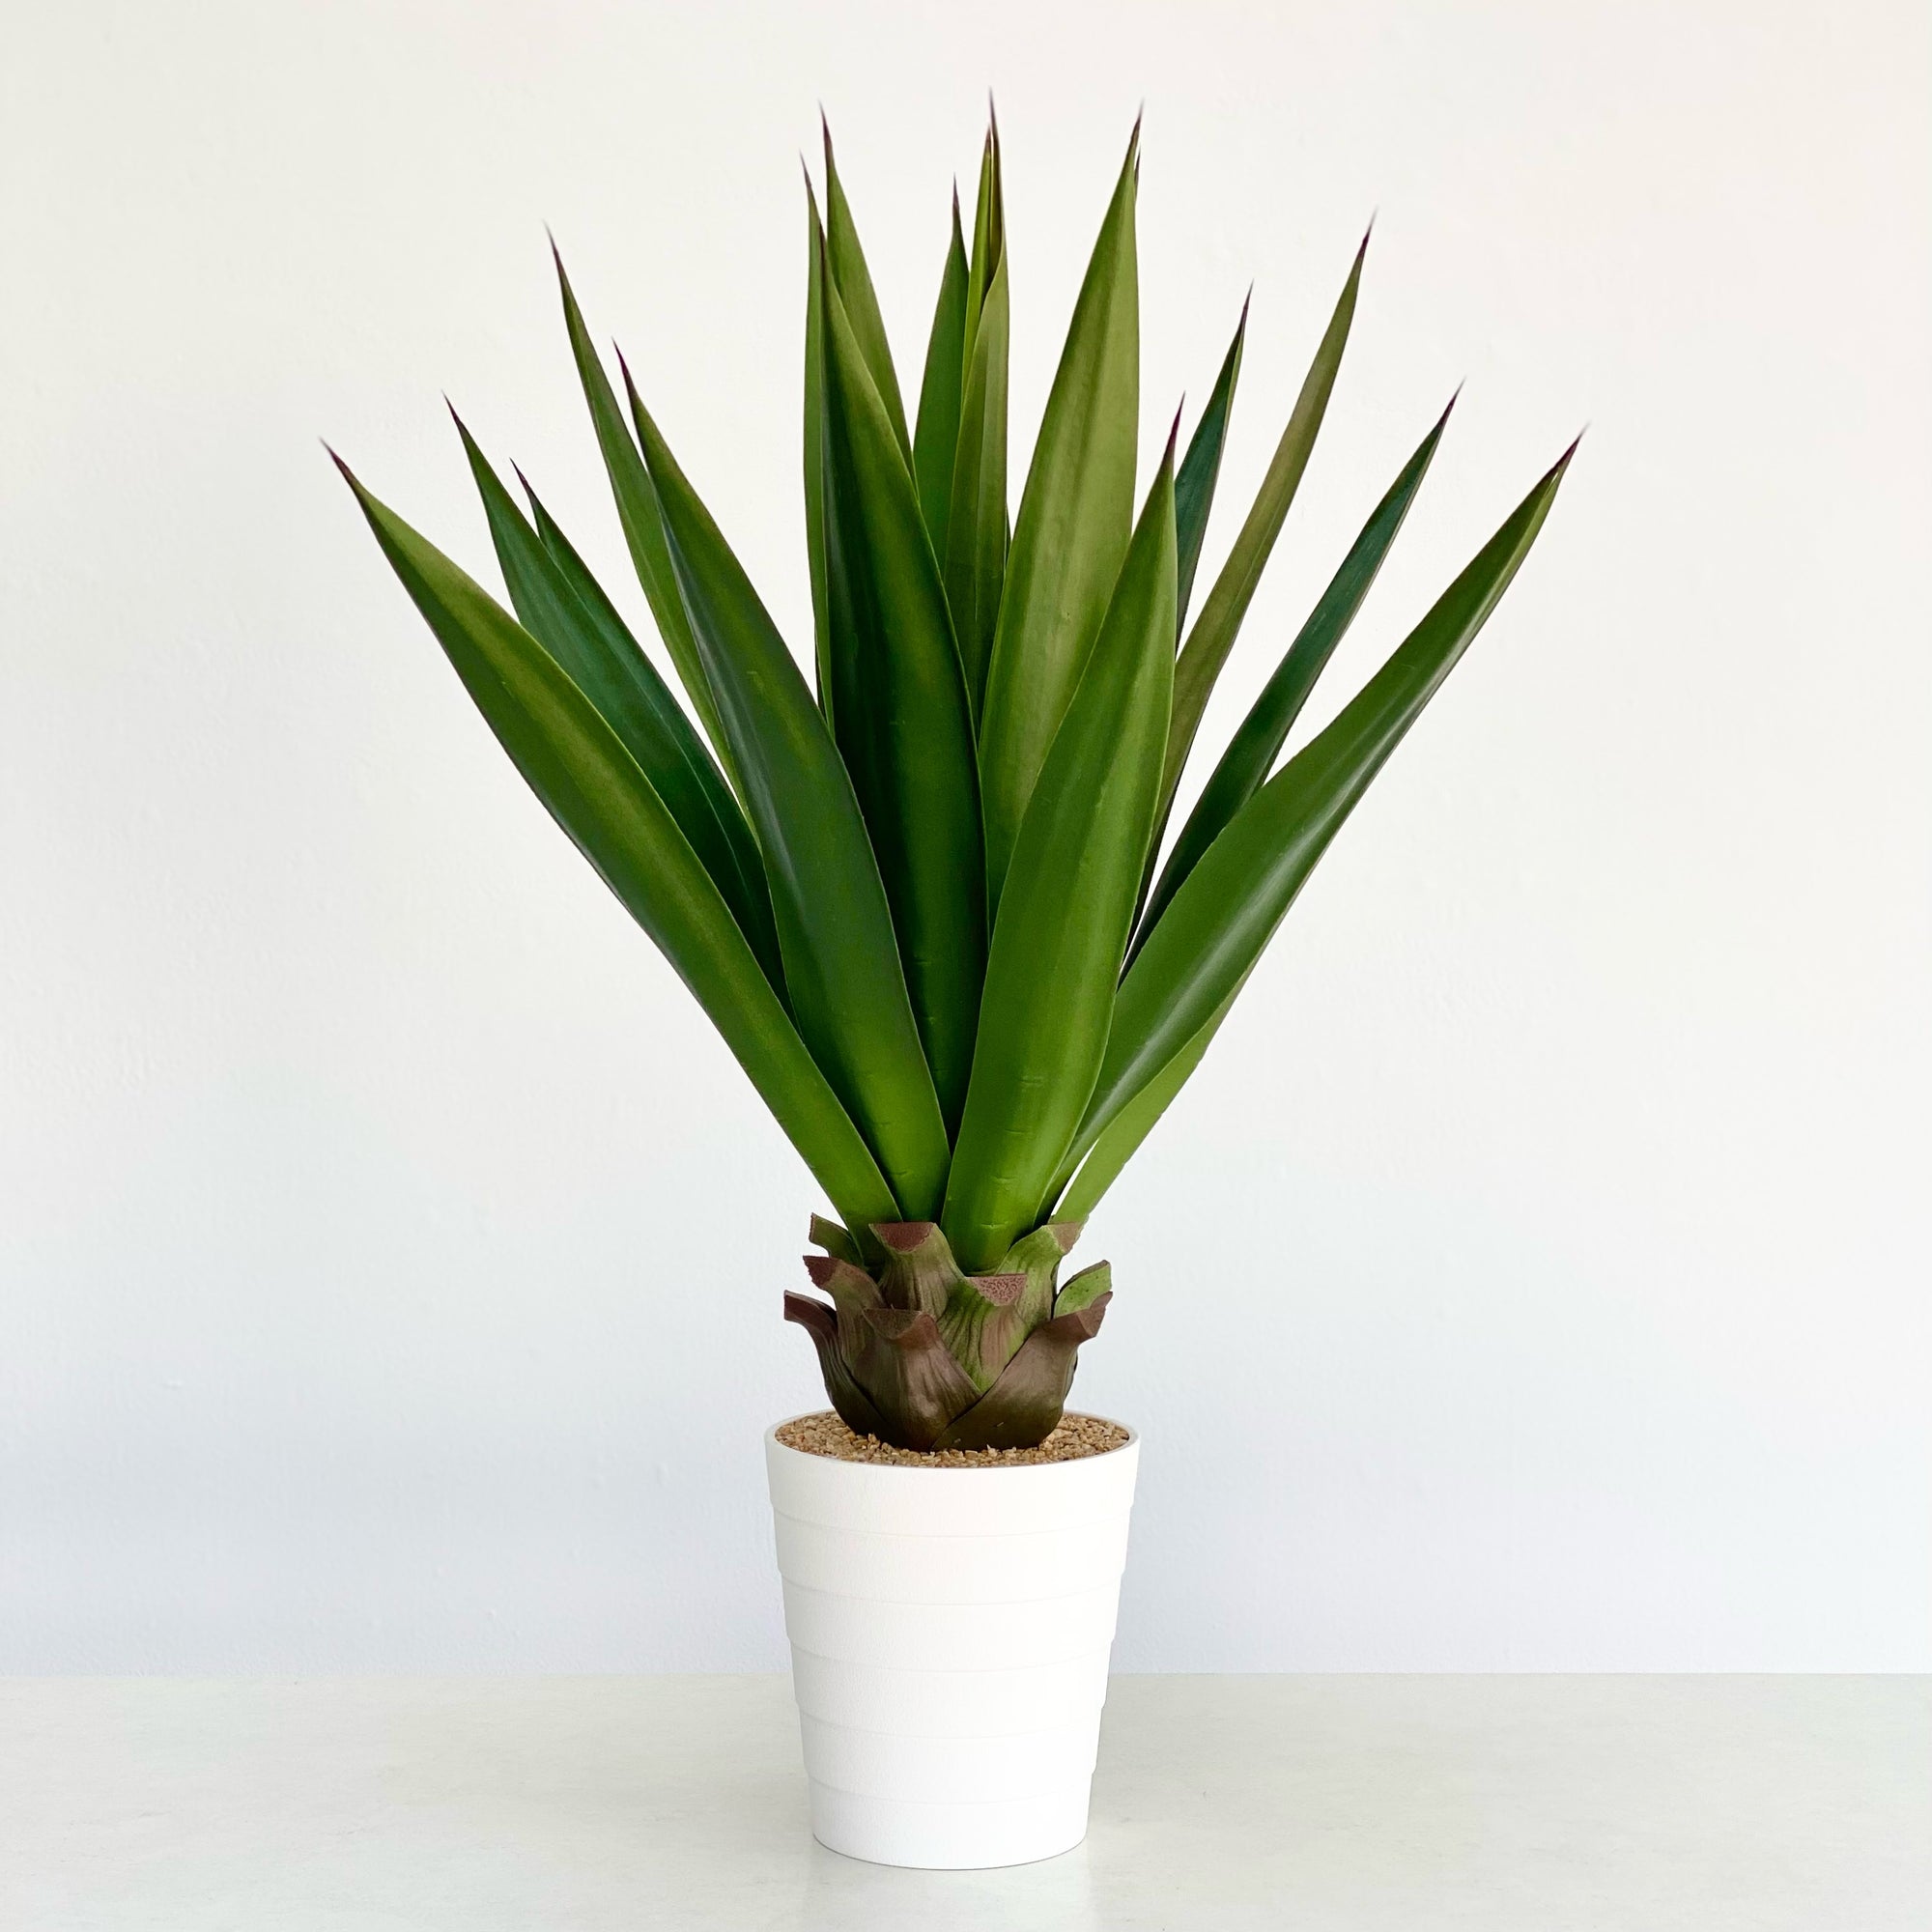 Green Agave Sisal Tree in a Pot